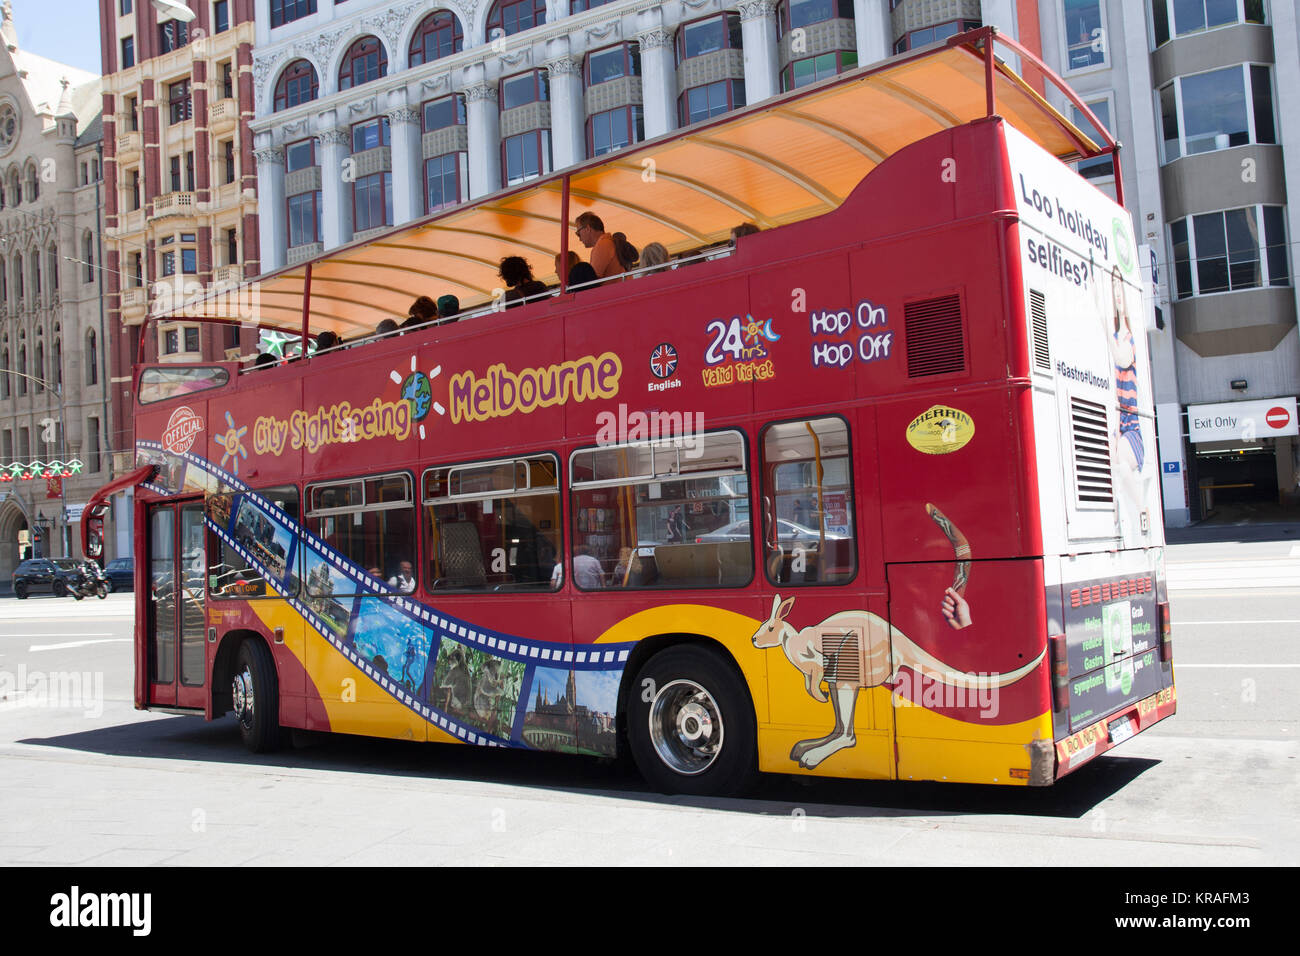 Melbourne, Australia - December 16, 2017: City Sightseeing double decker bus in Melbourne Downtown Stock Photo